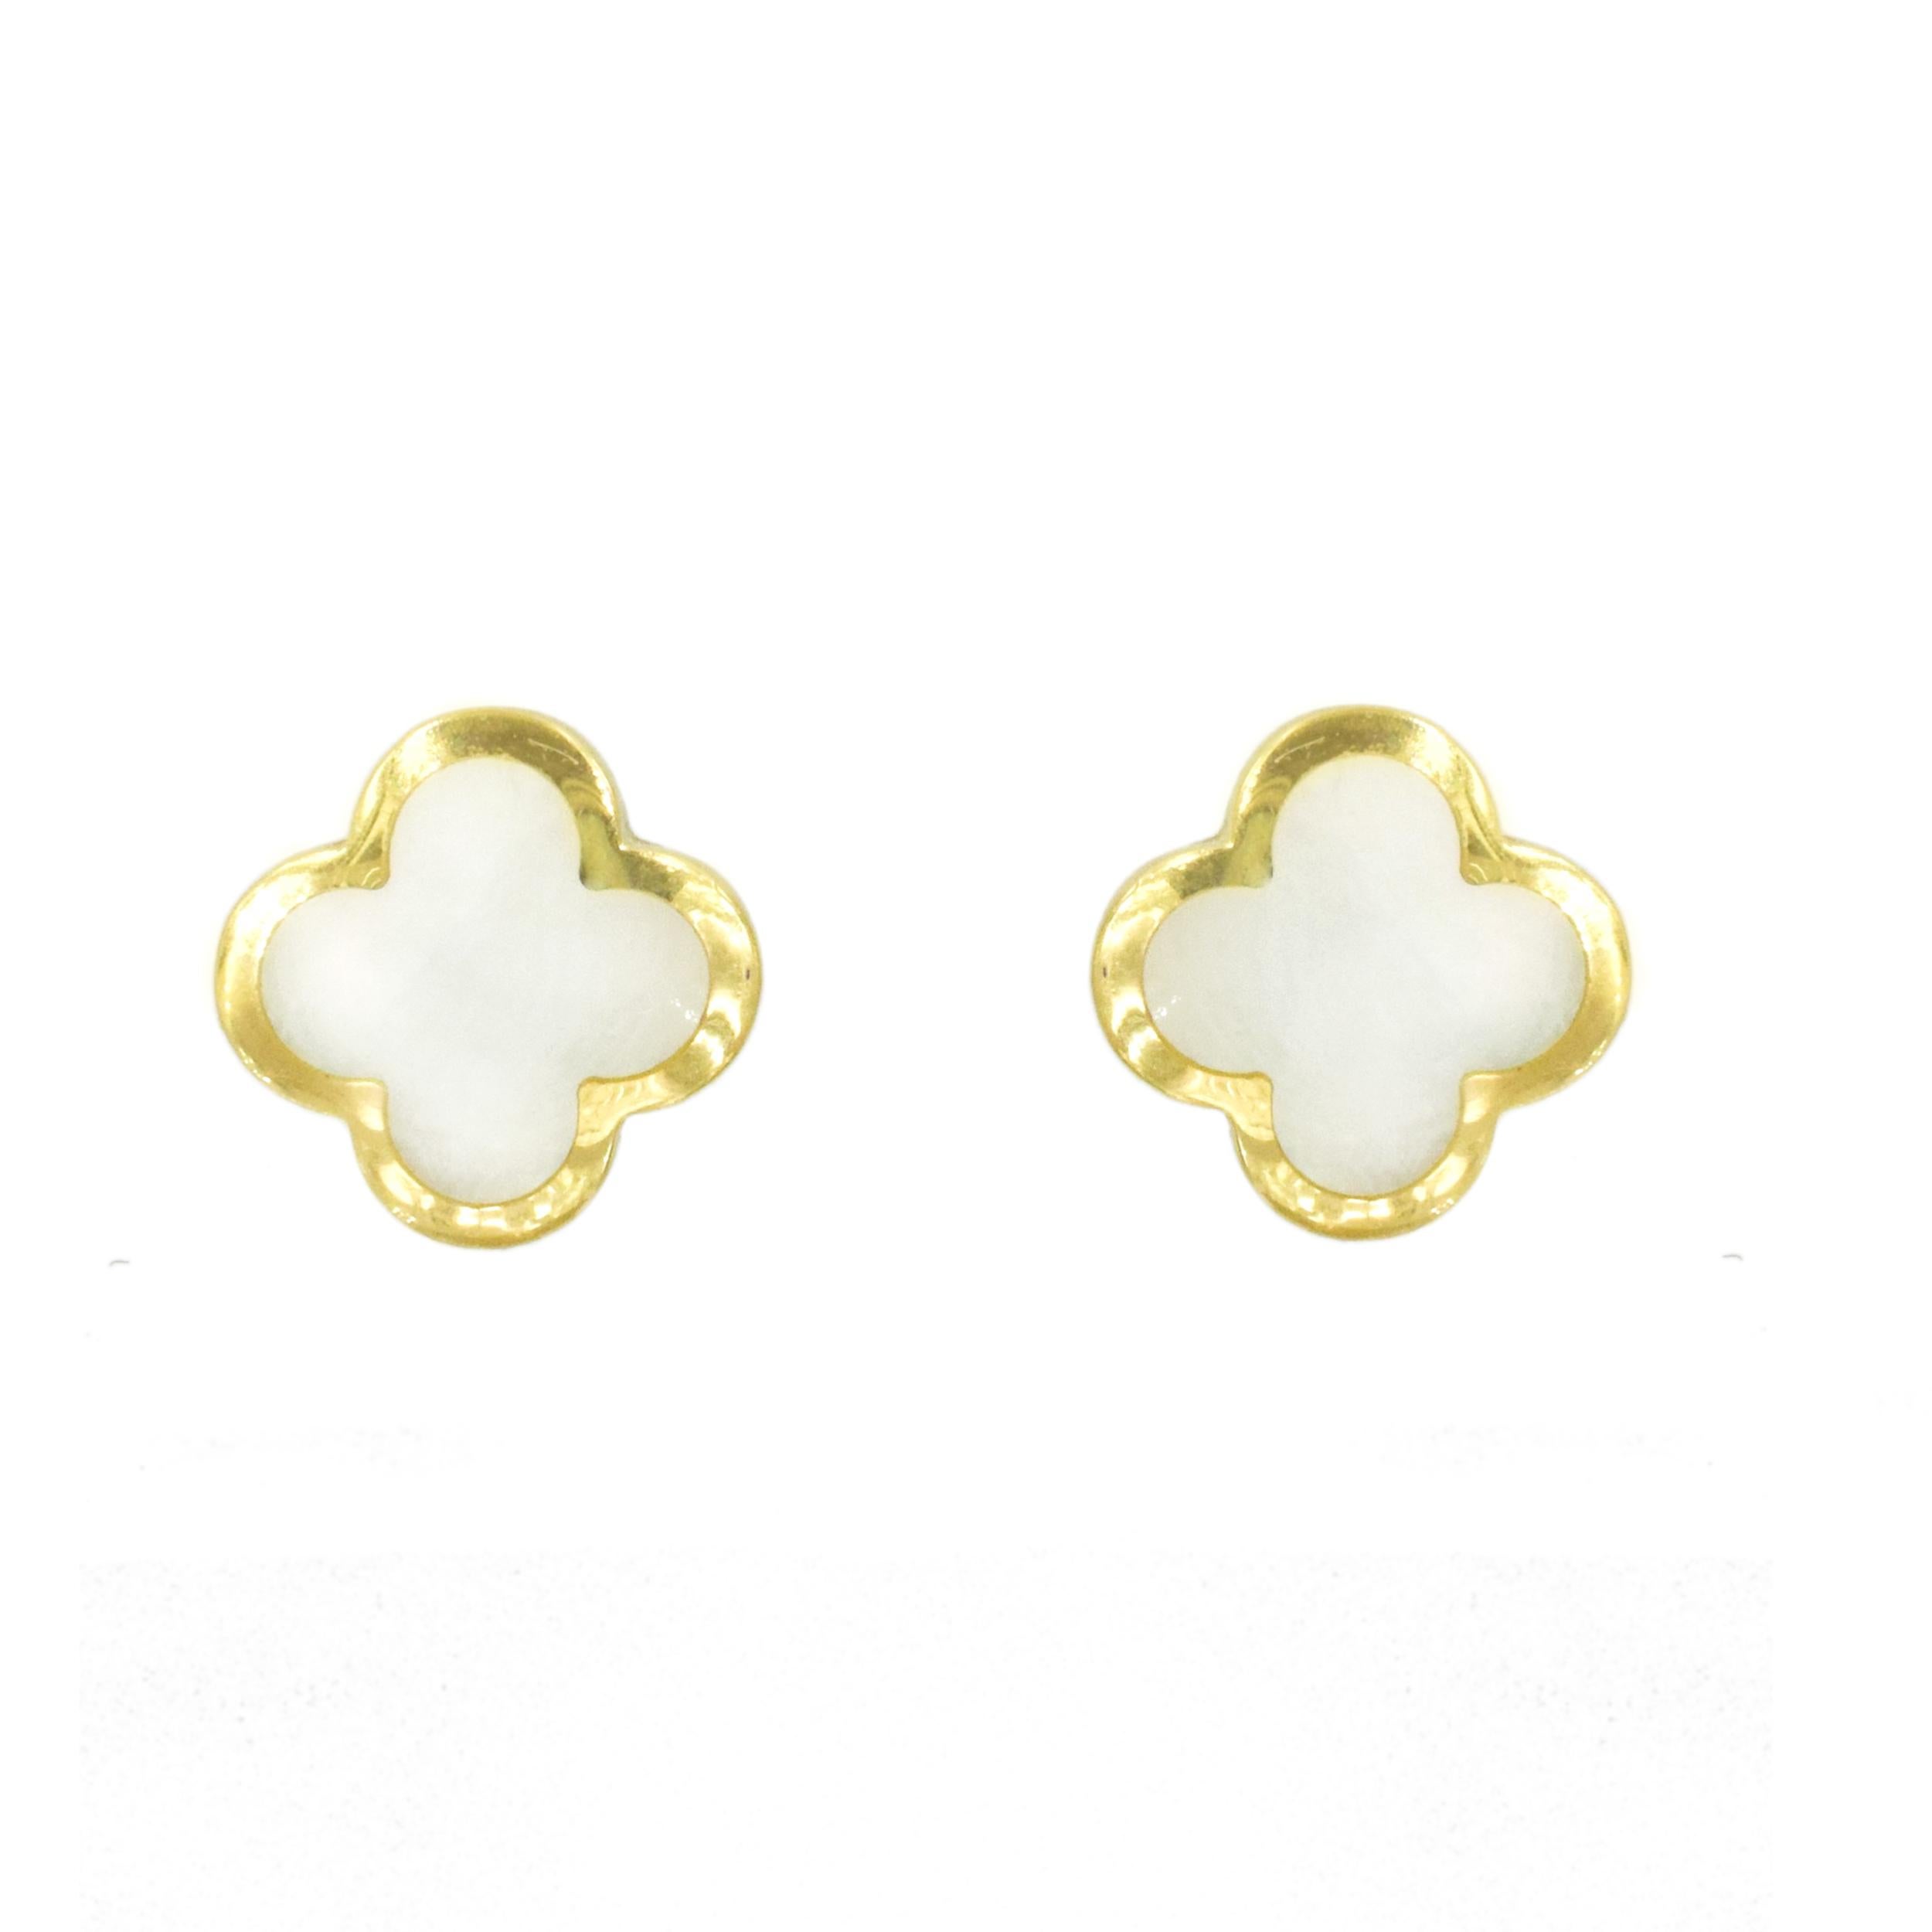 Van Cleef and Arpels Pure Alhambra earrings. The earrings are crafted in
18k yellow gold with center set with white mother of pearl. Diameter: 11mm. Inscribed: VCA,
Au750, JE, 847312. Stamped with makers mark and french hallmark.
 Equipped with